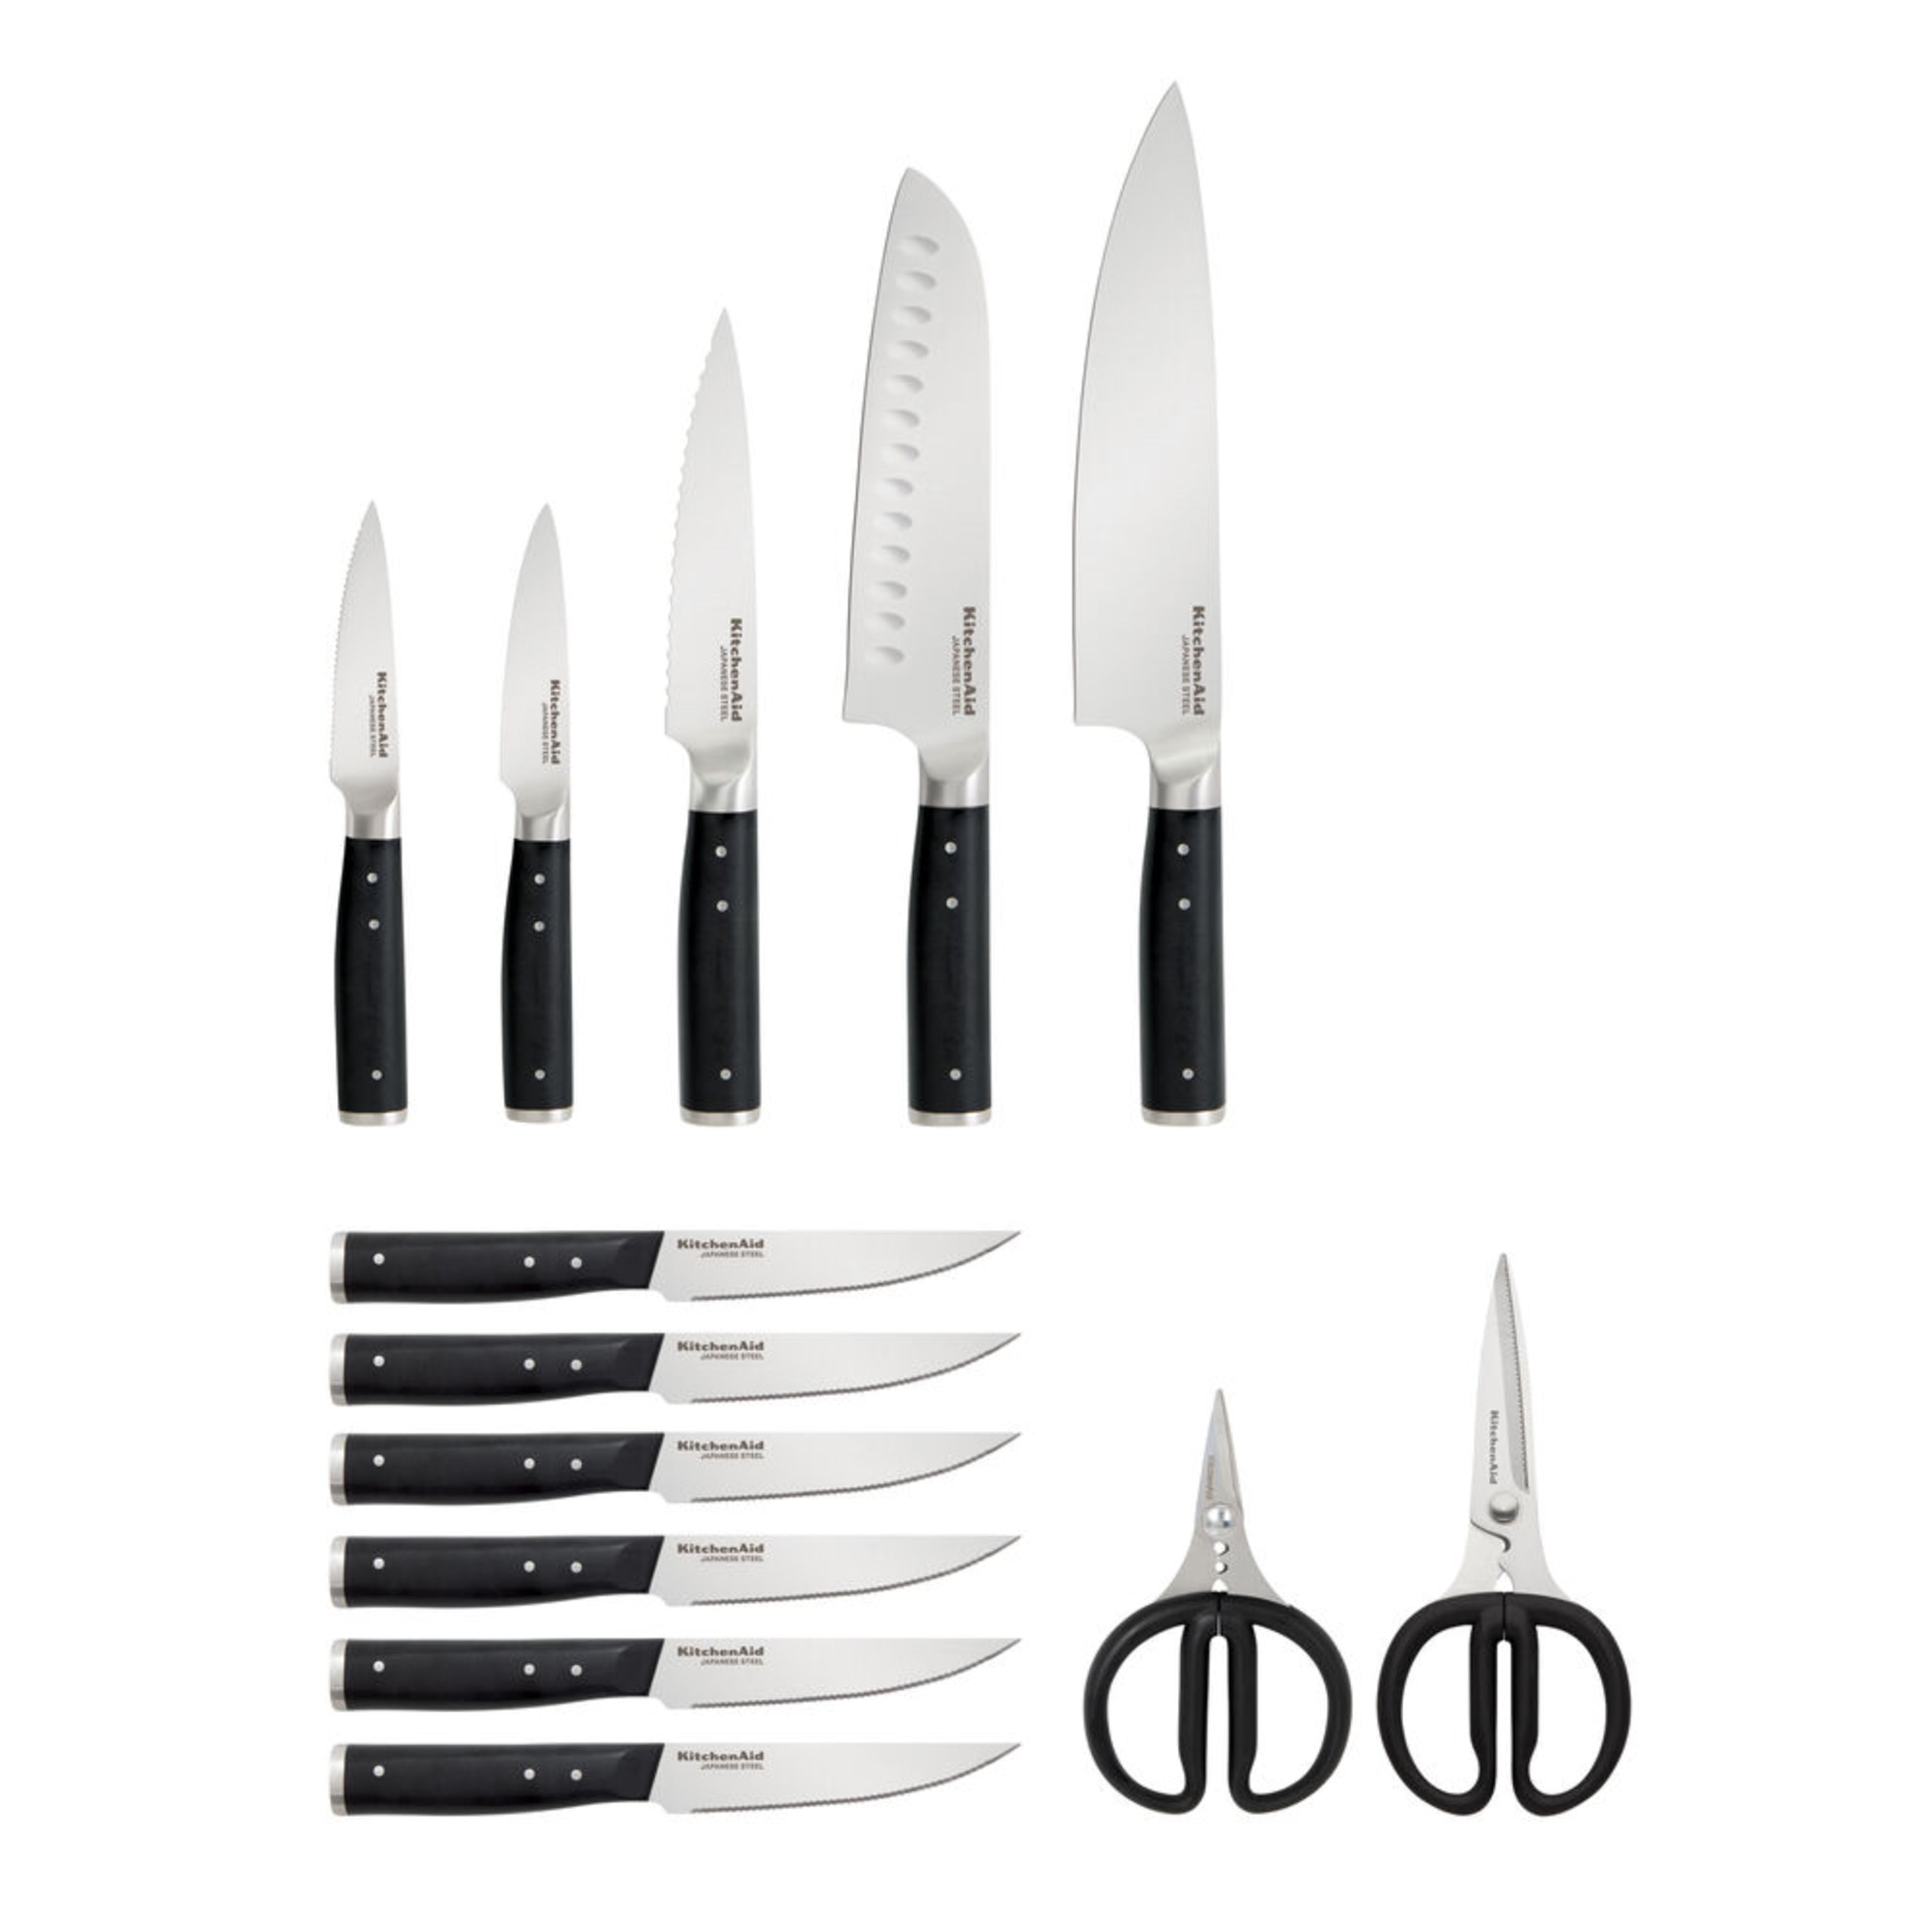 KITCHEN AID KNIFE BLOCK AND REPLACEMENT KNIFE KNIVES: U Pick and